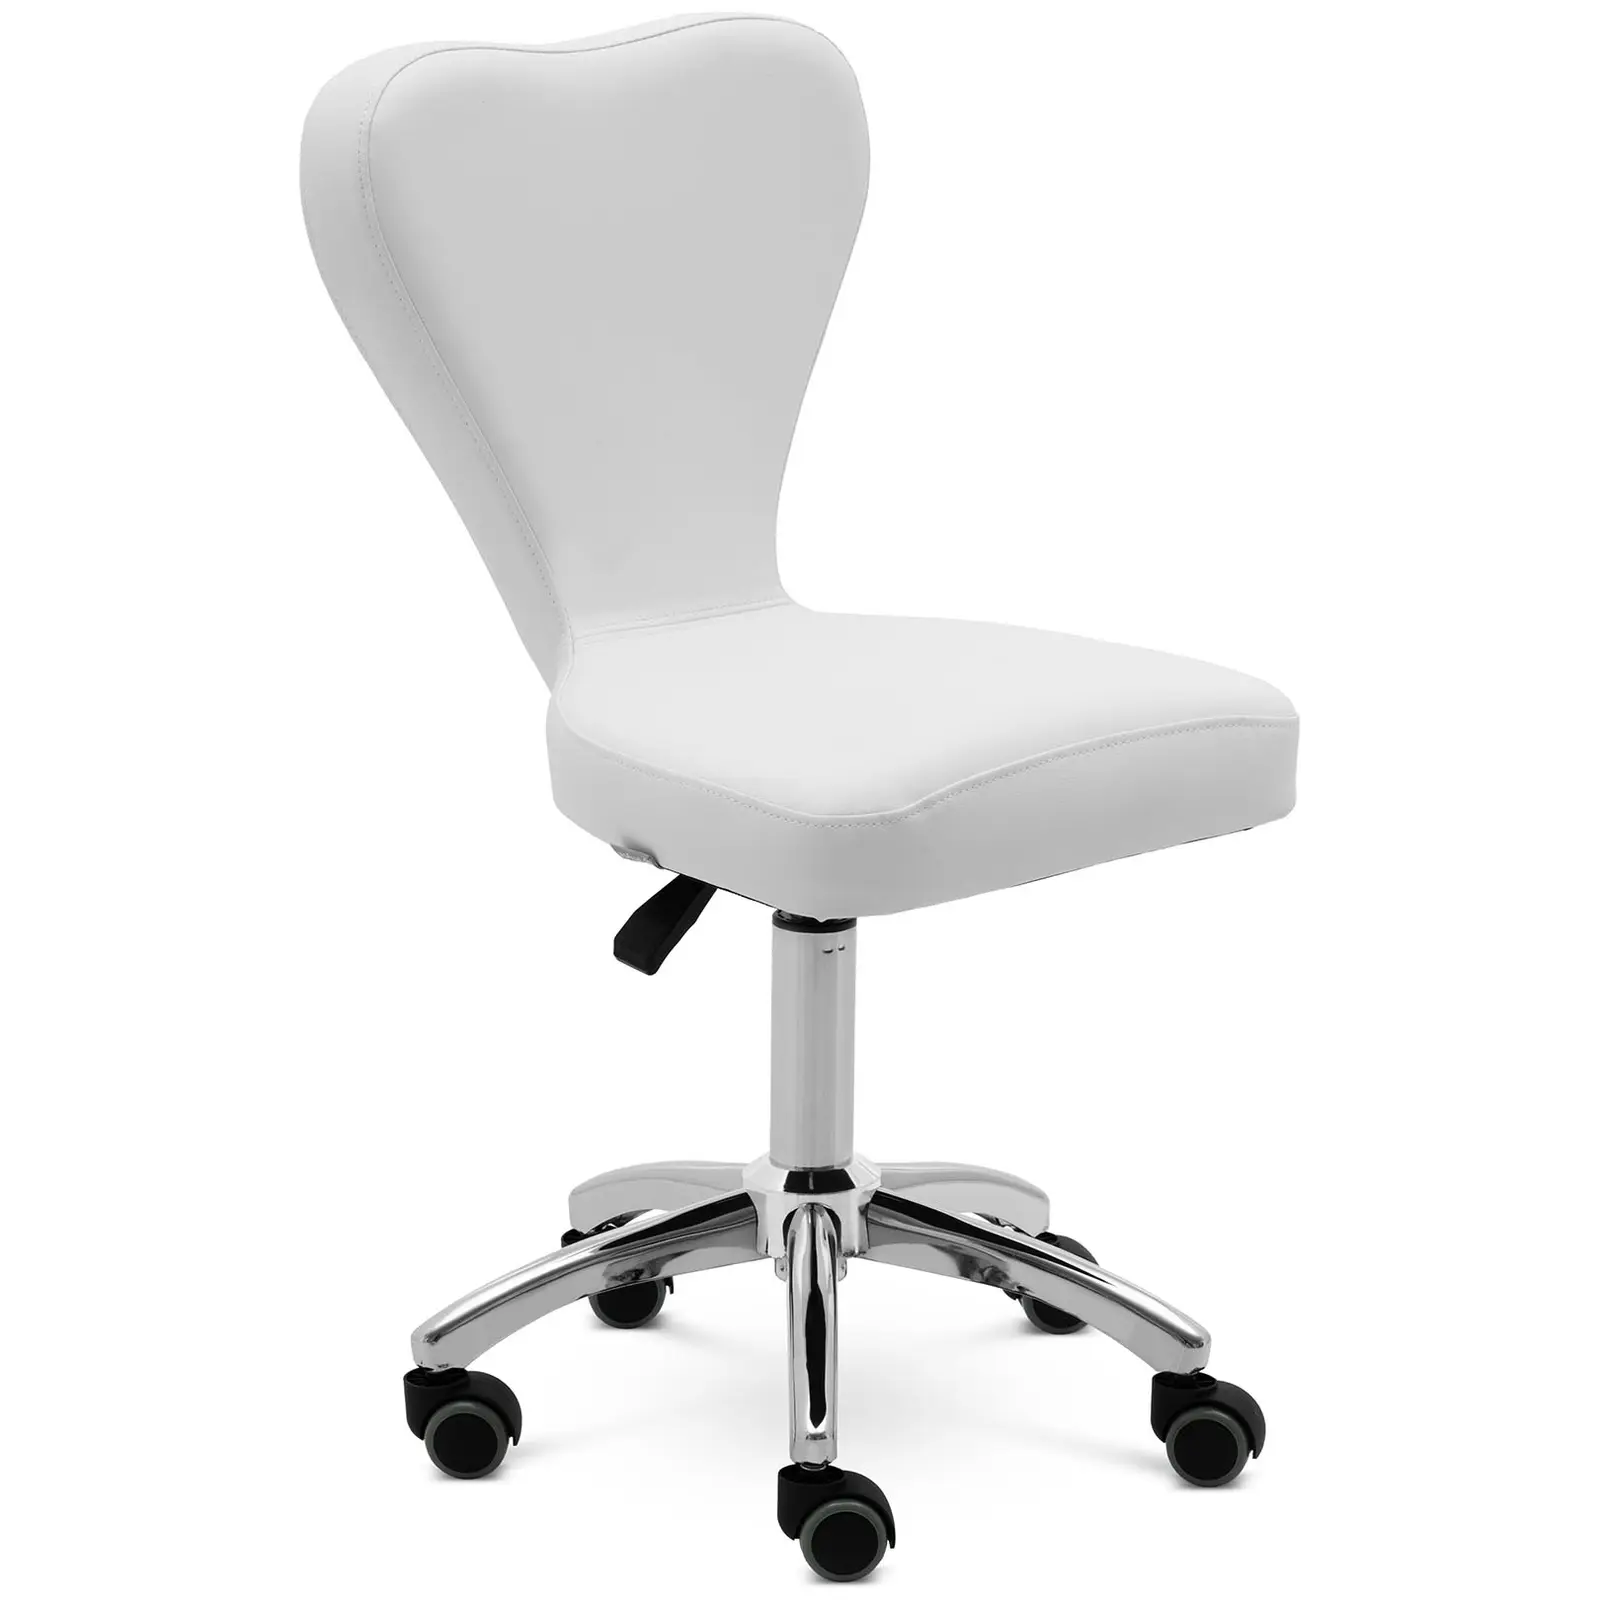 Stool Chair With Back - 49 - 63 cm - 150 kg - white